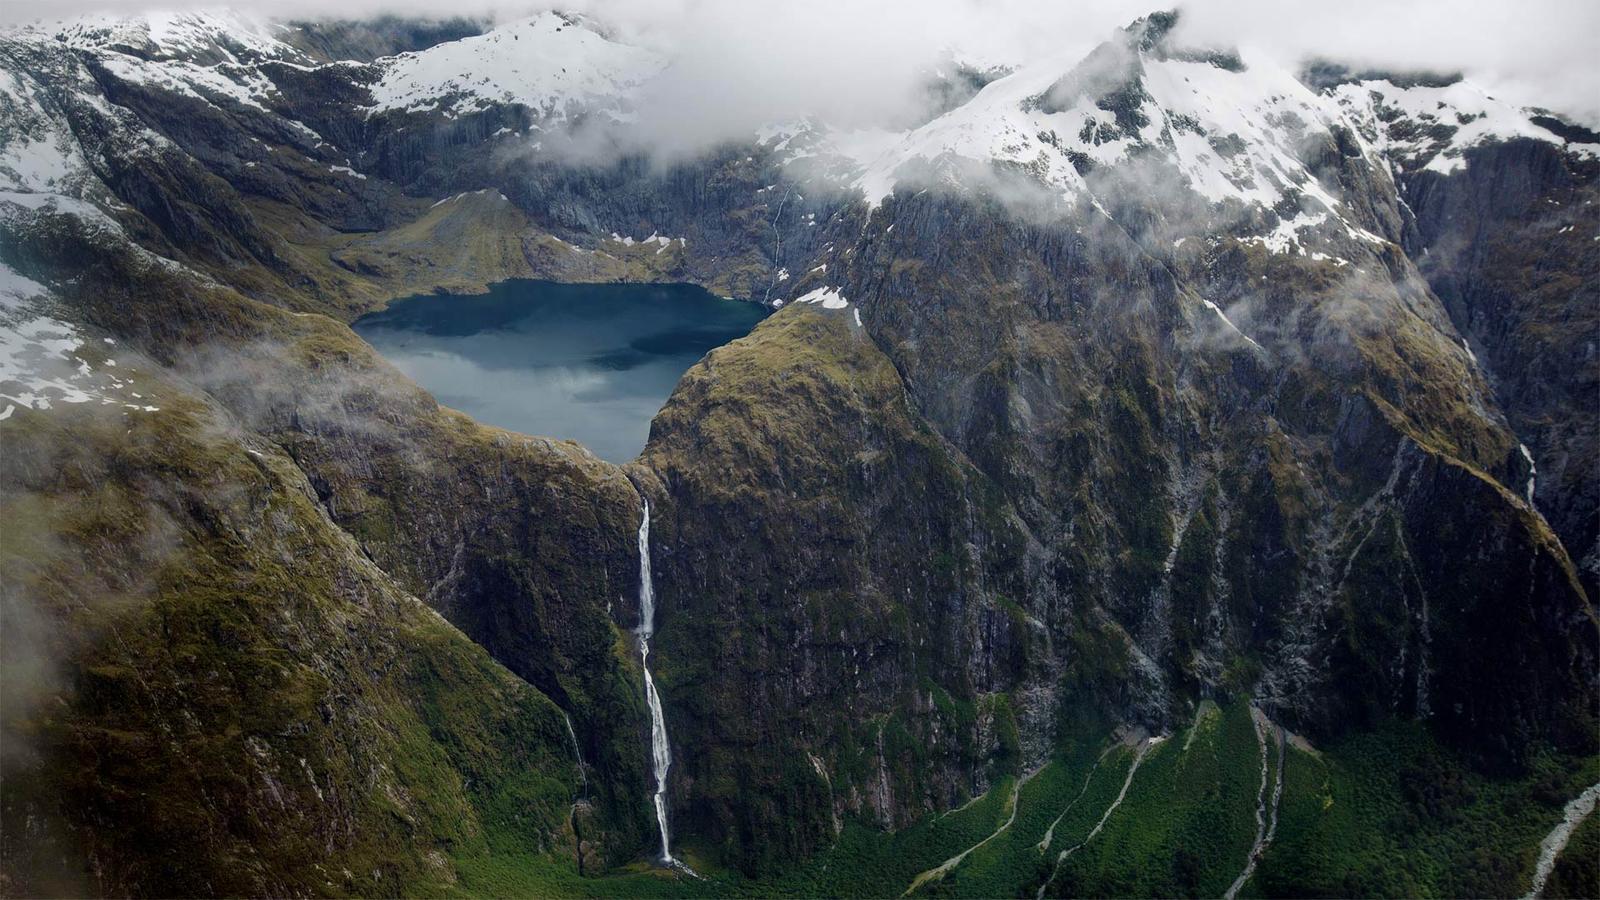 Can You Match These Natural Wonders to Their Locations? Sutherland Falls, New Zealand